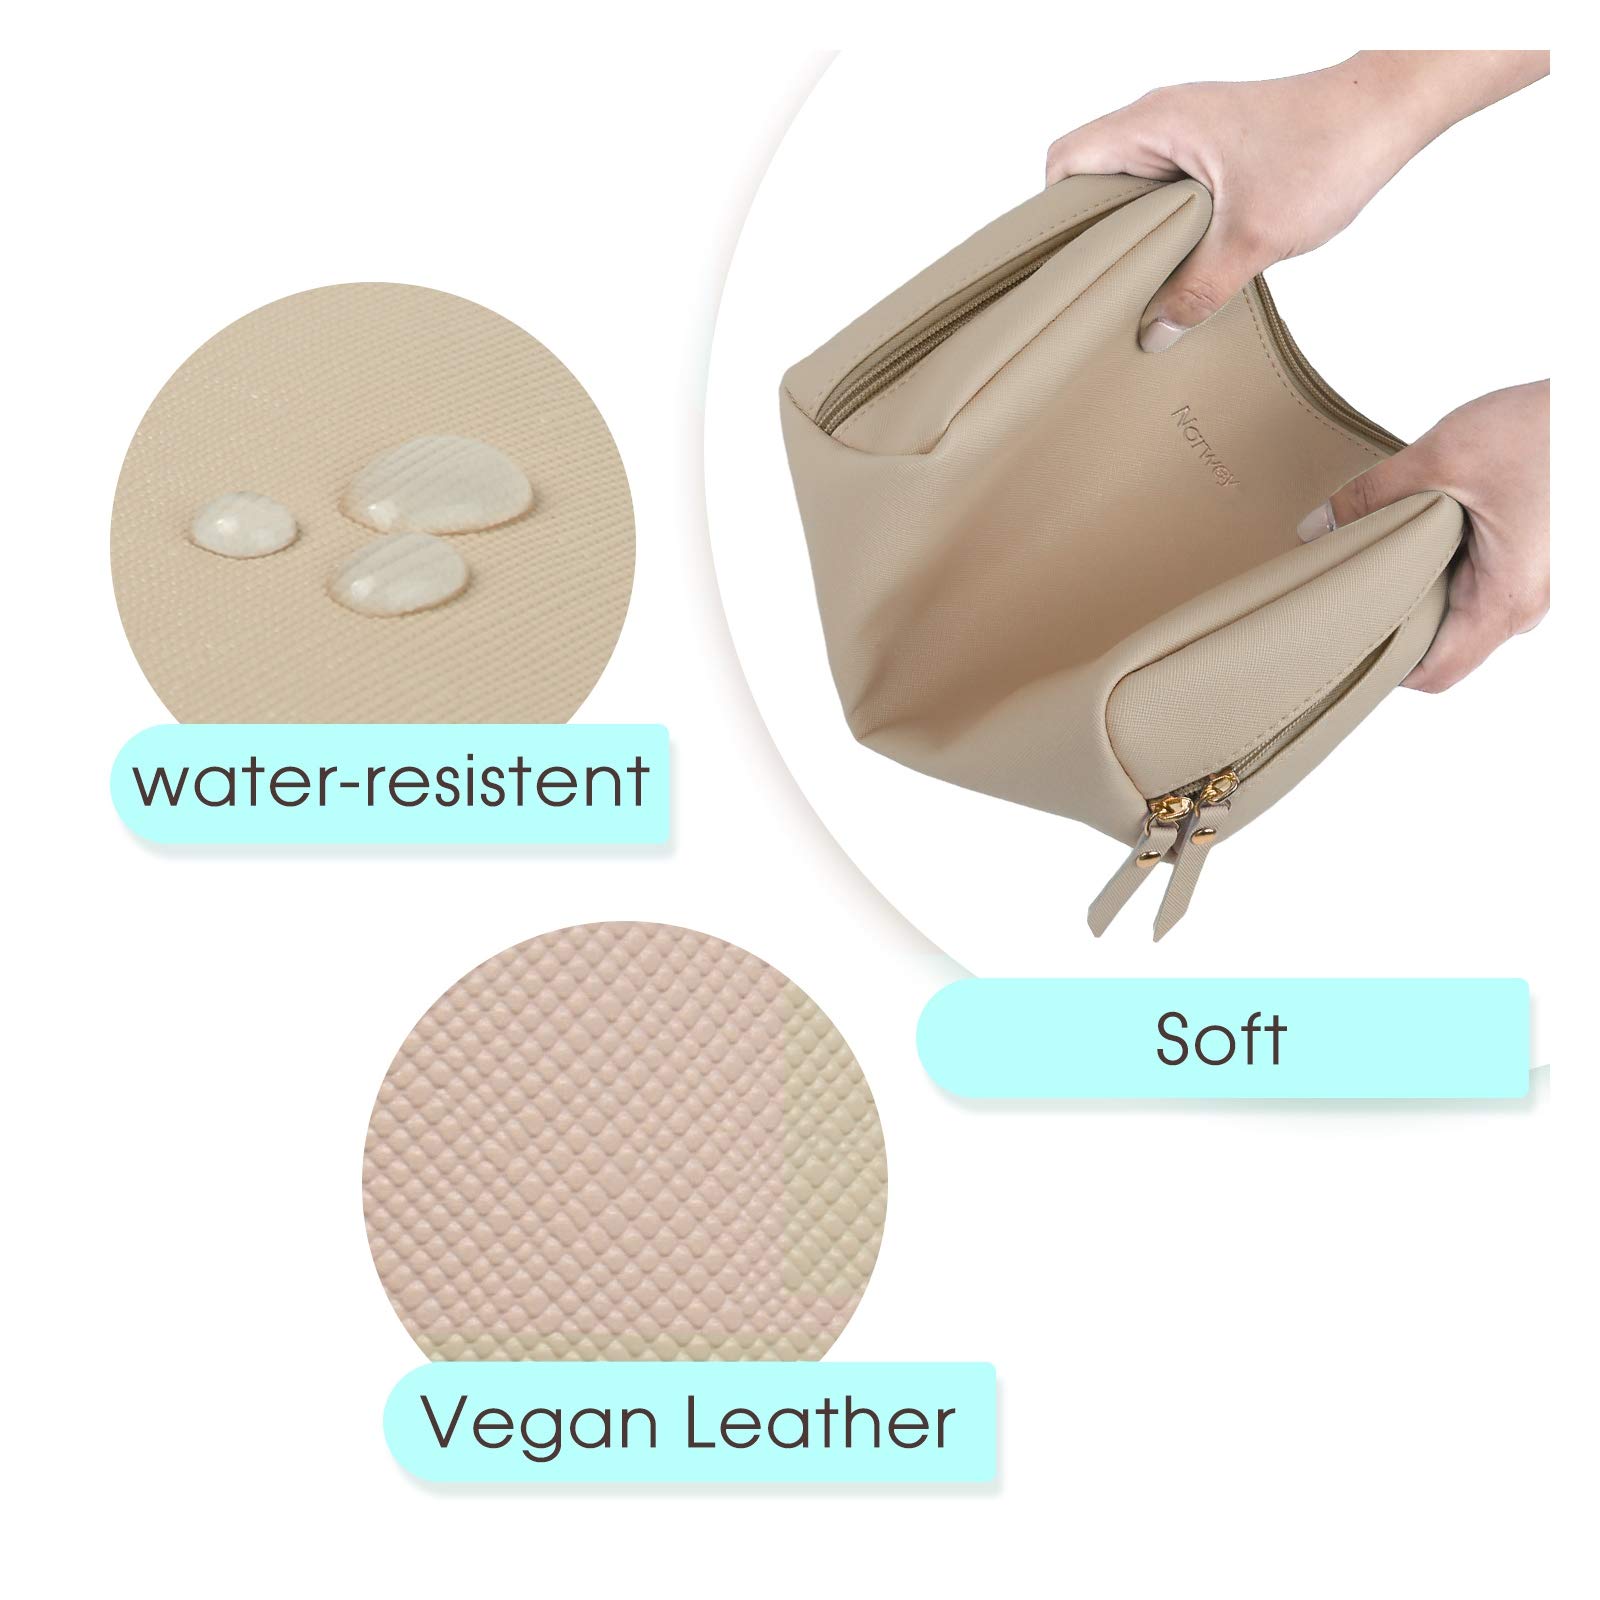 Large Vegan Leather Makeup Bag Zipper Pouch Travel Cosmetic Organizer for Women (Large, Brown)